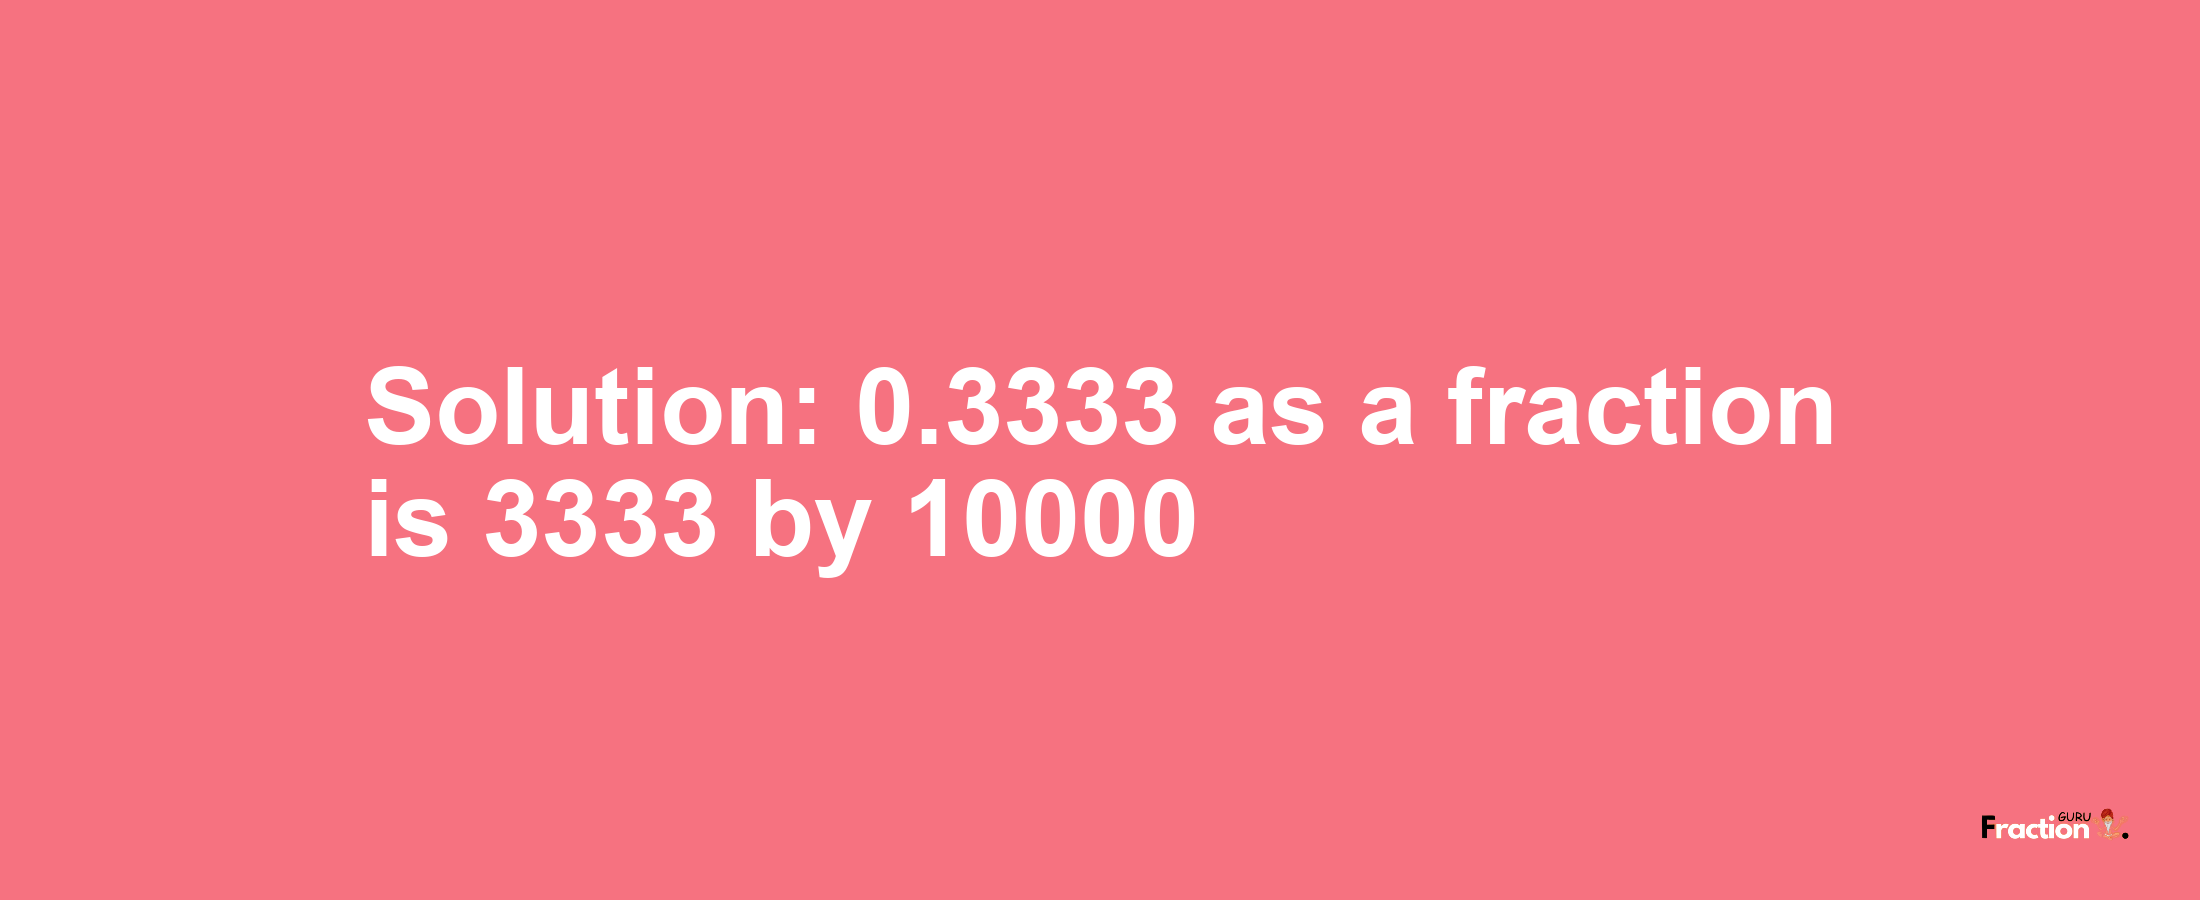 Solution:0.3333 as a fraction is 3333/10000